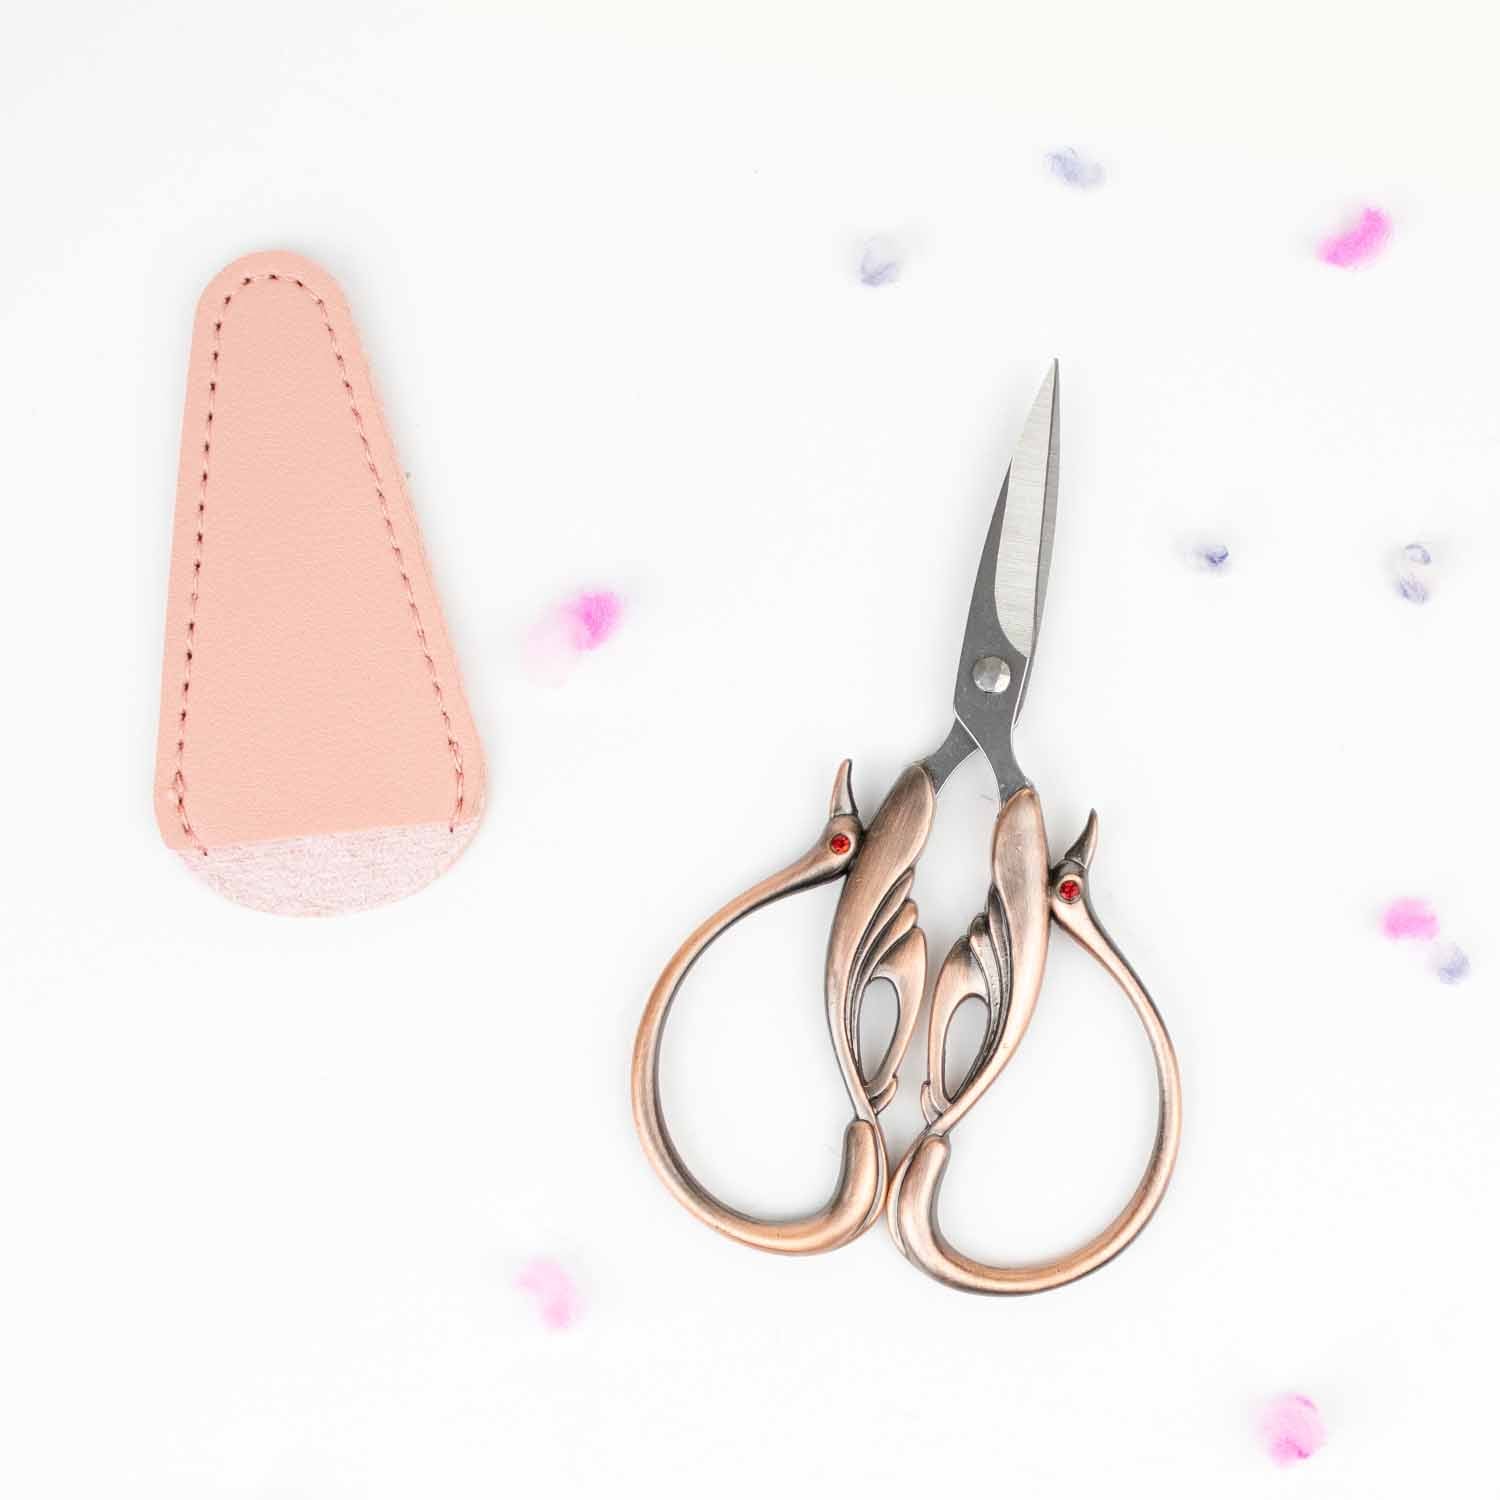 Classic Stainless Steel Fabric Shears - 2 Sizes